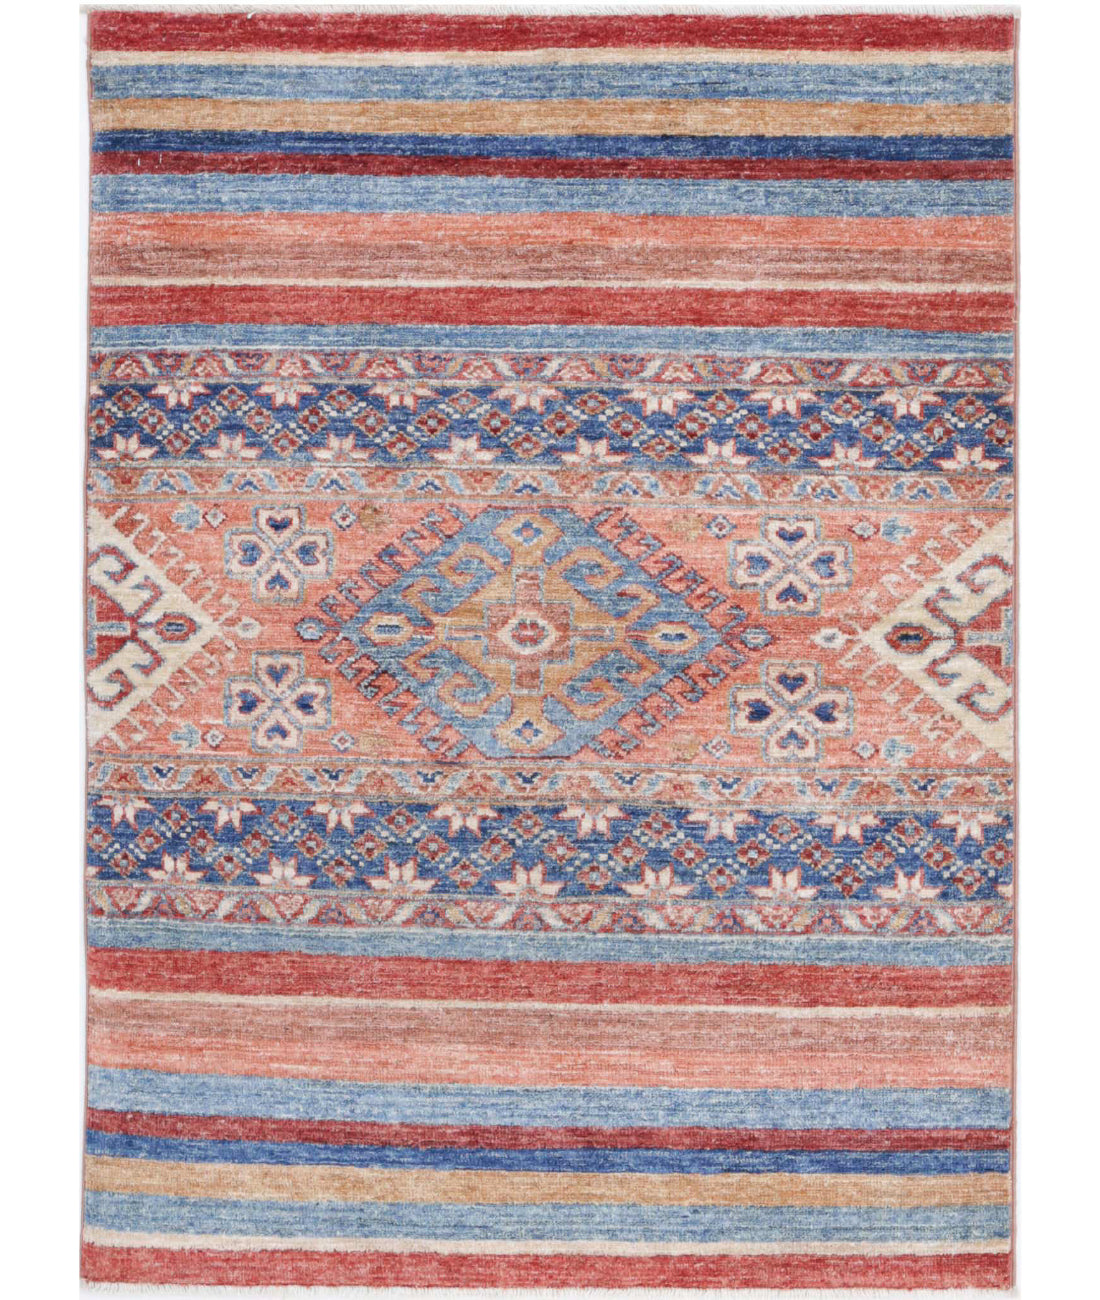 Hand Knotted Khurjeen Wool Rug - 2'9'' x 3'9'' 2'9'' x 3'9'' (83 X 113) / Multi / Multi